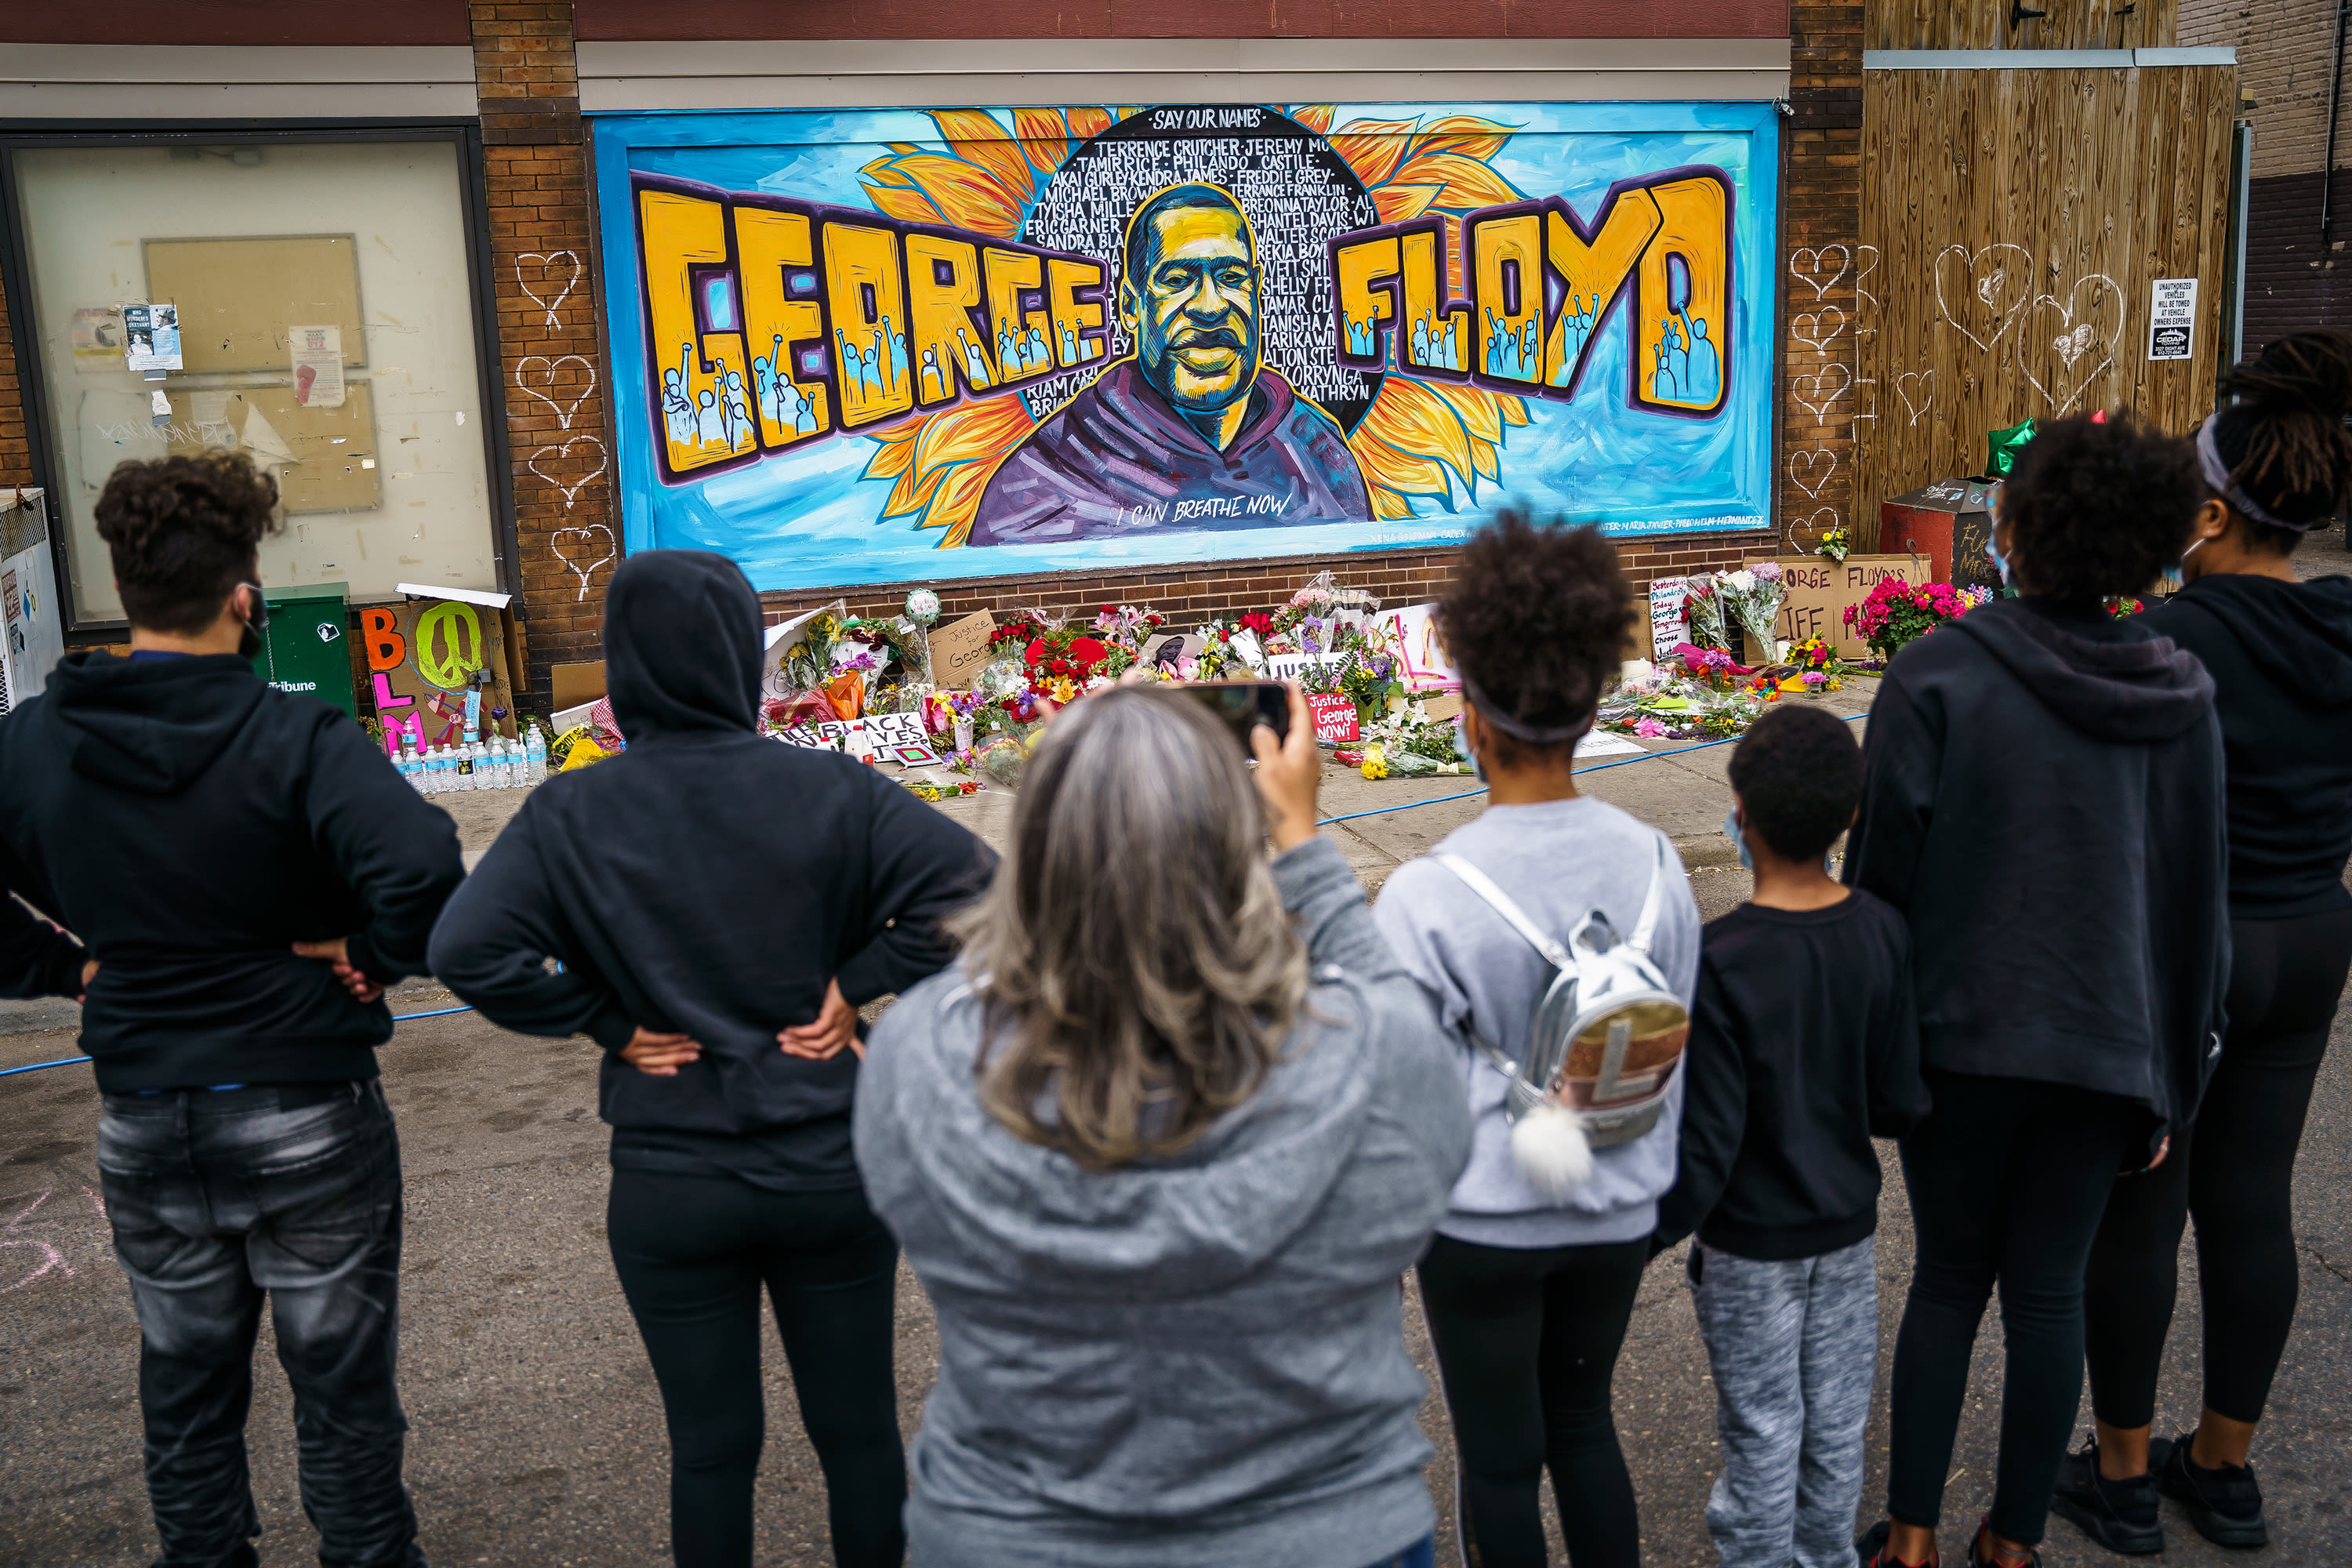 Four years after George Floyd’s murder, Minnesota’s racial gaps remain stark